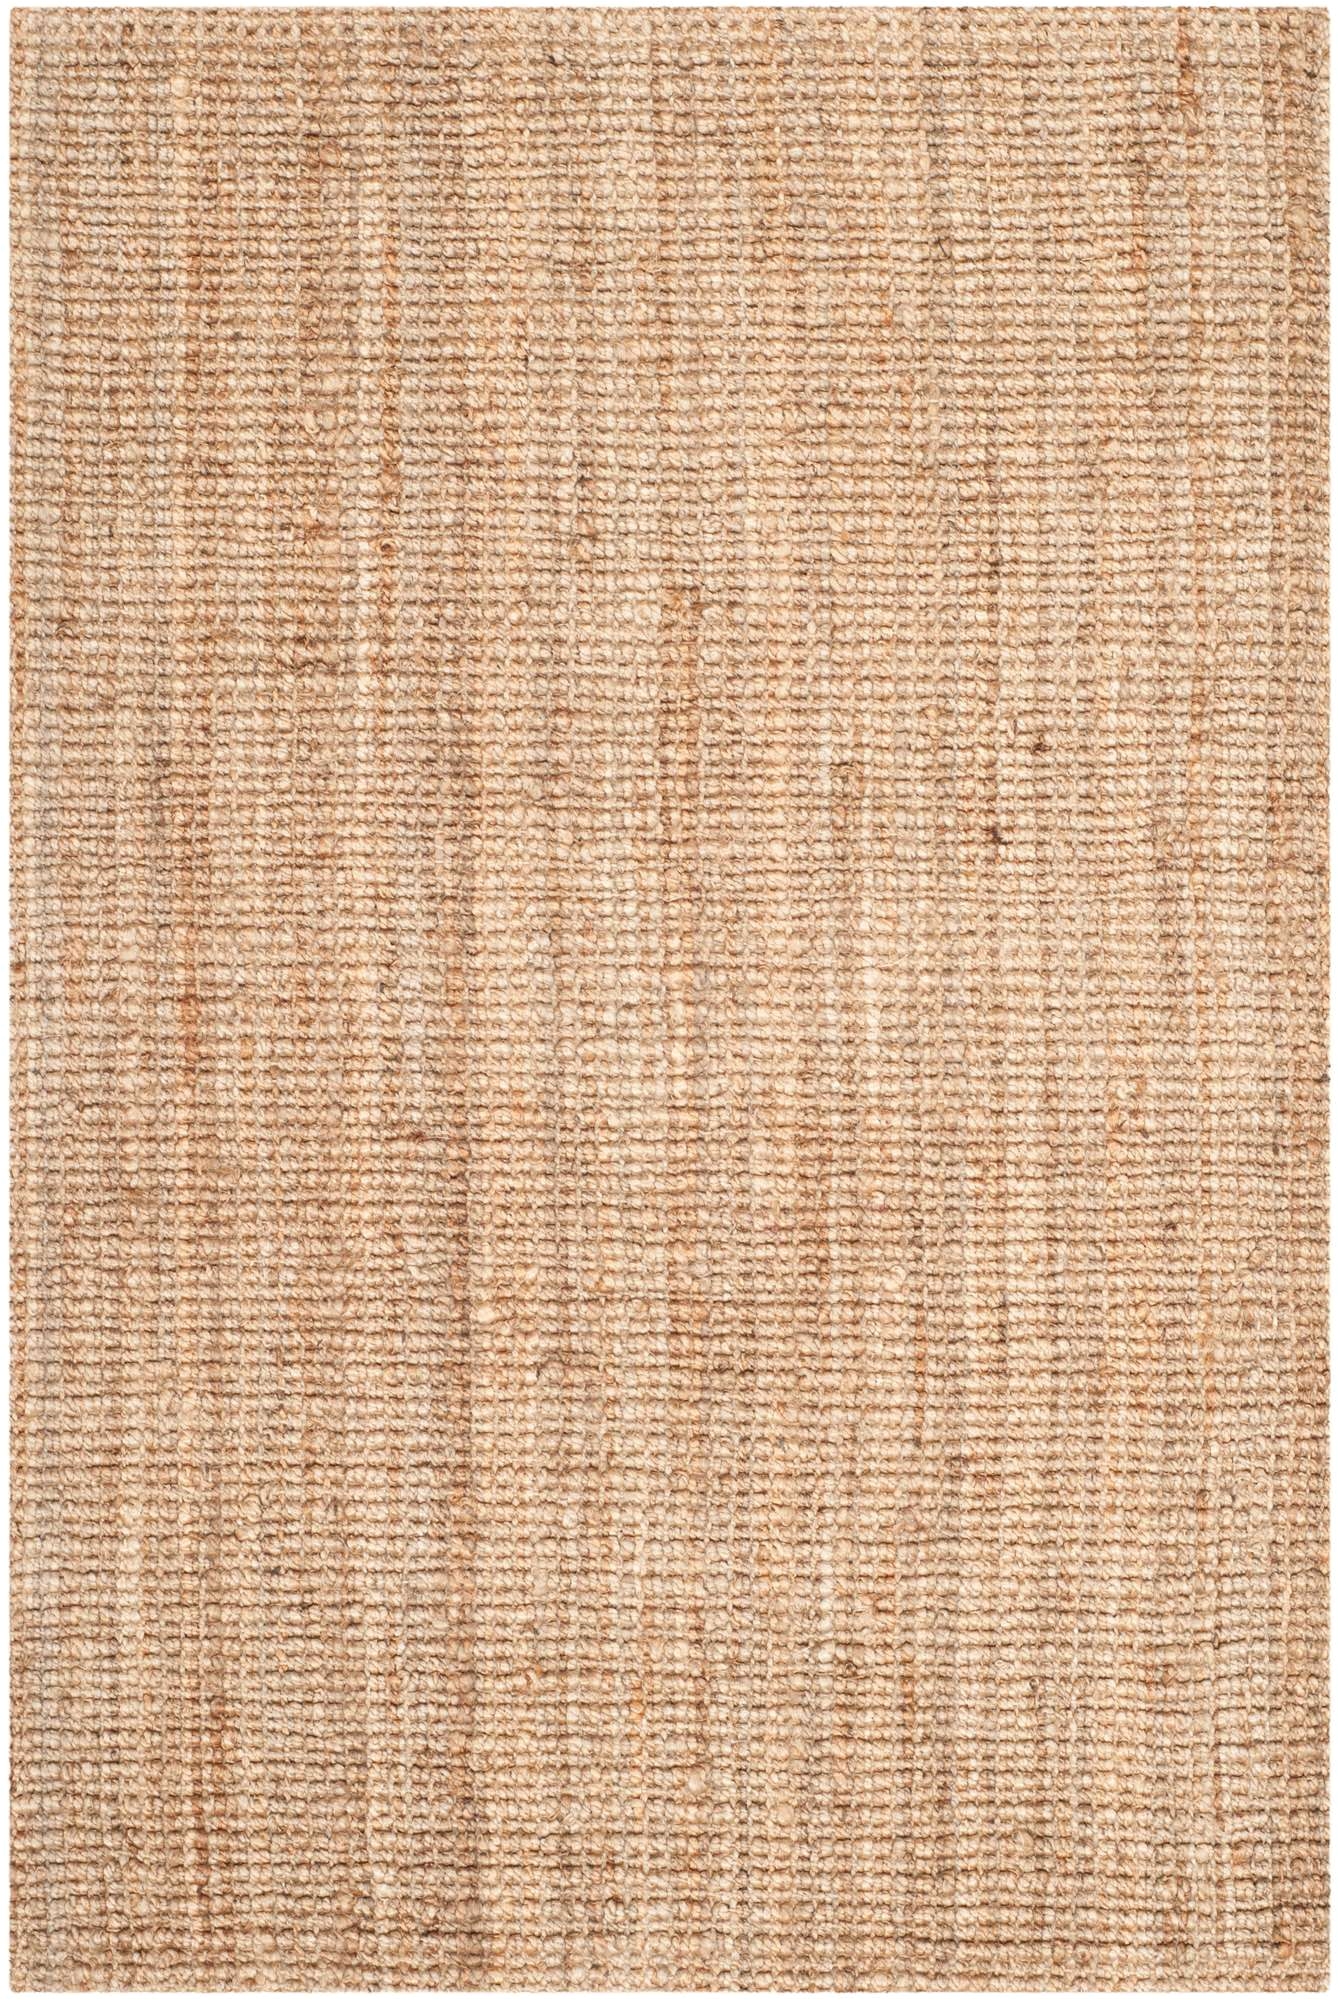 think coastal living and casual beach house style with rugs so classic they even work in the city safavieh natural fiber rugs are soft underfoot